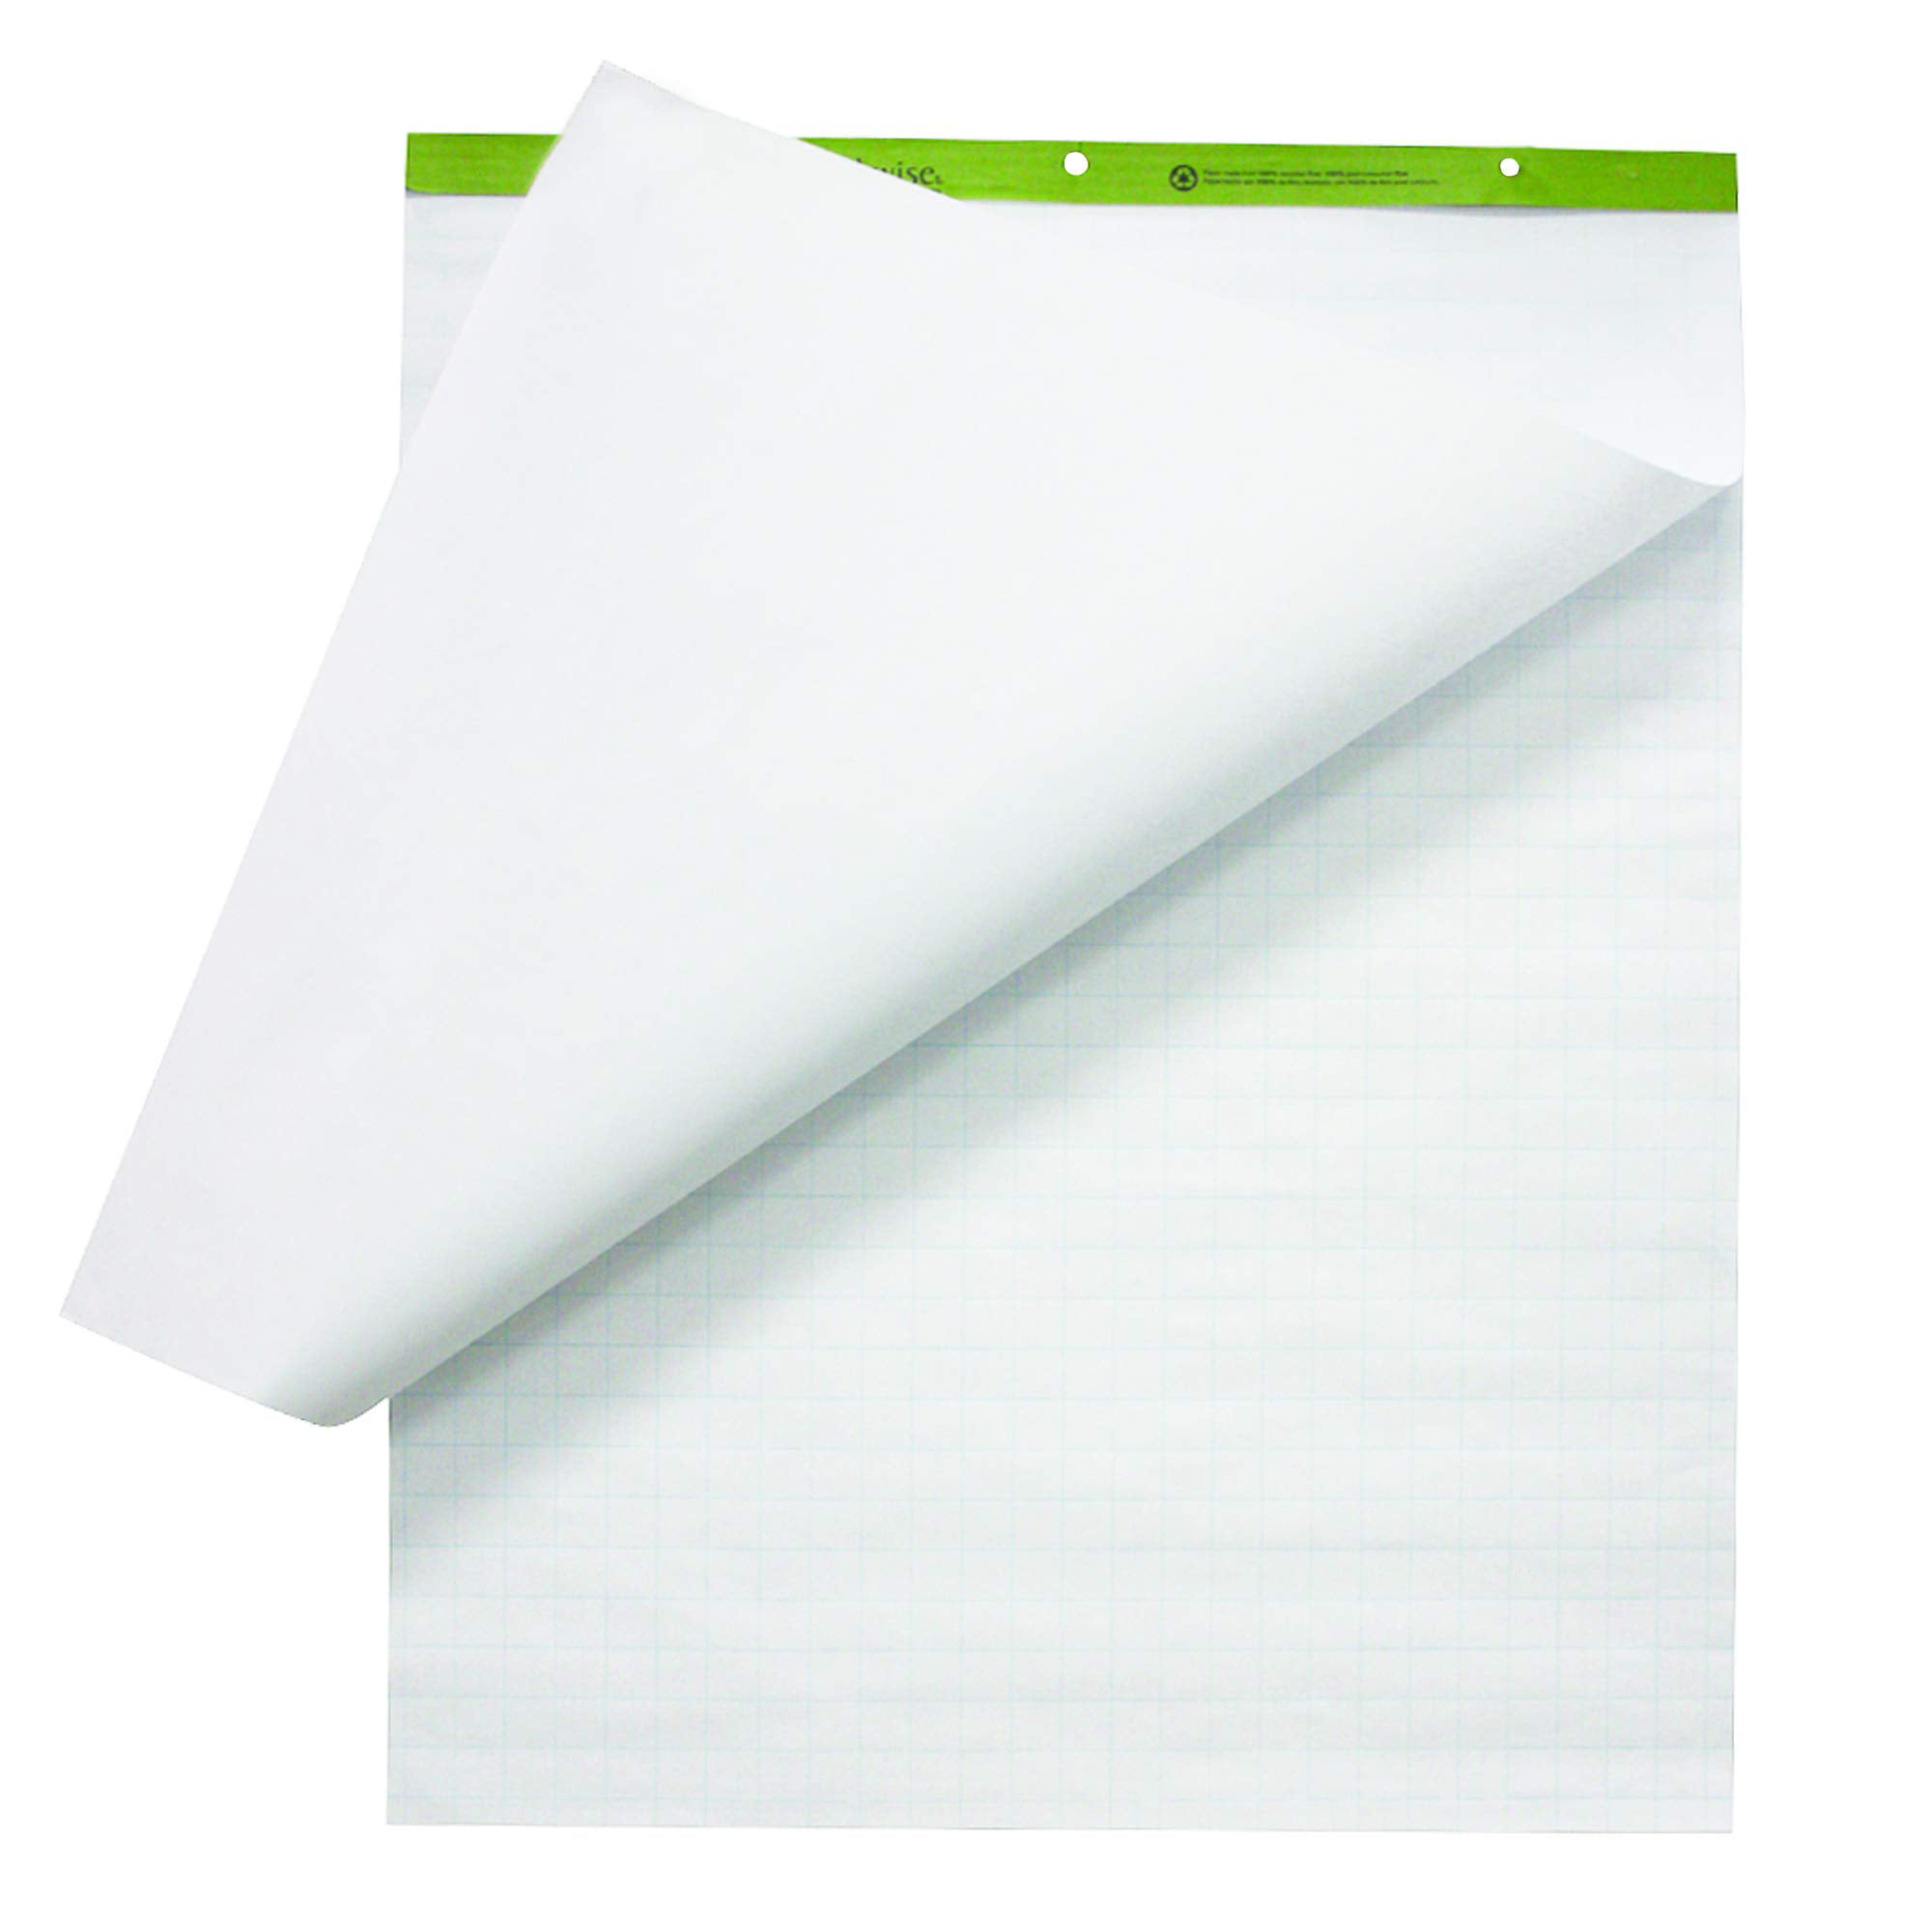 Easel Pad, Non-Adhesive, White, Unruled 27 x 34, 50 Sheets - PAC3385, Dixon Ticonderoga Co - Pacon